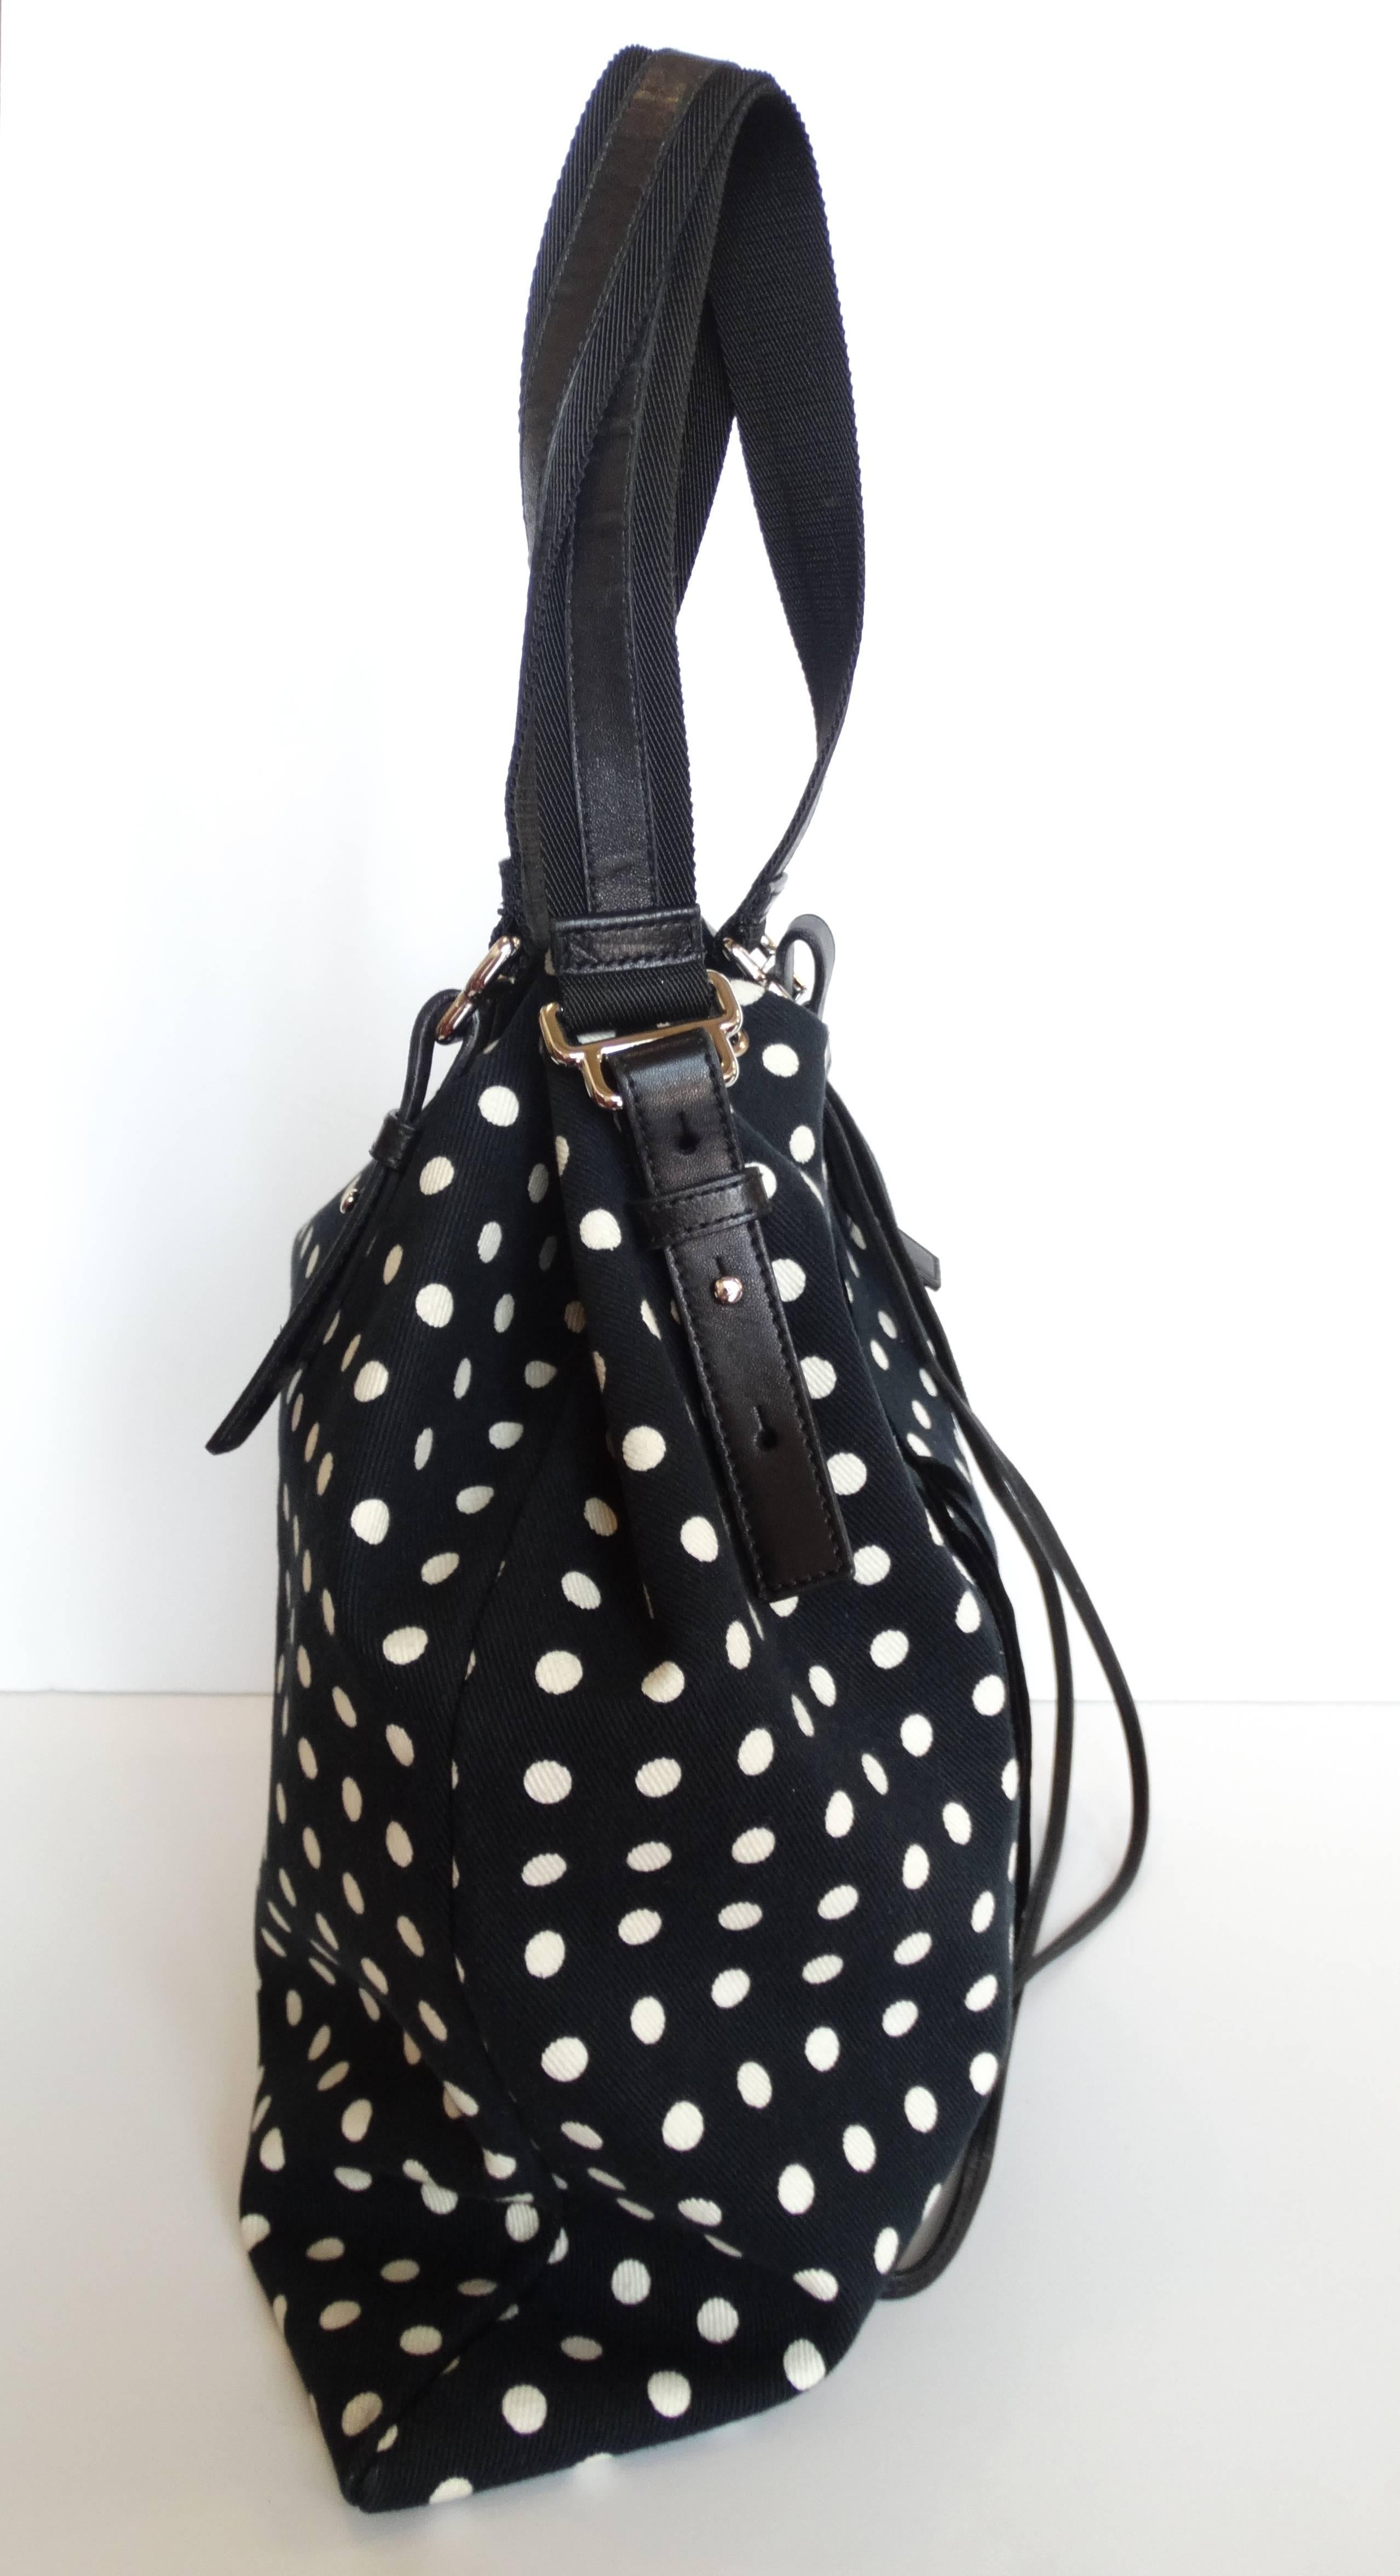 Black and white polkadot printed canvas with leather straps and details. Black velvet YSL signature down the front of the bag. Top cinches in with leather drawstring strap. Silver hardware, Satin lined interior with zip pouch in the side.